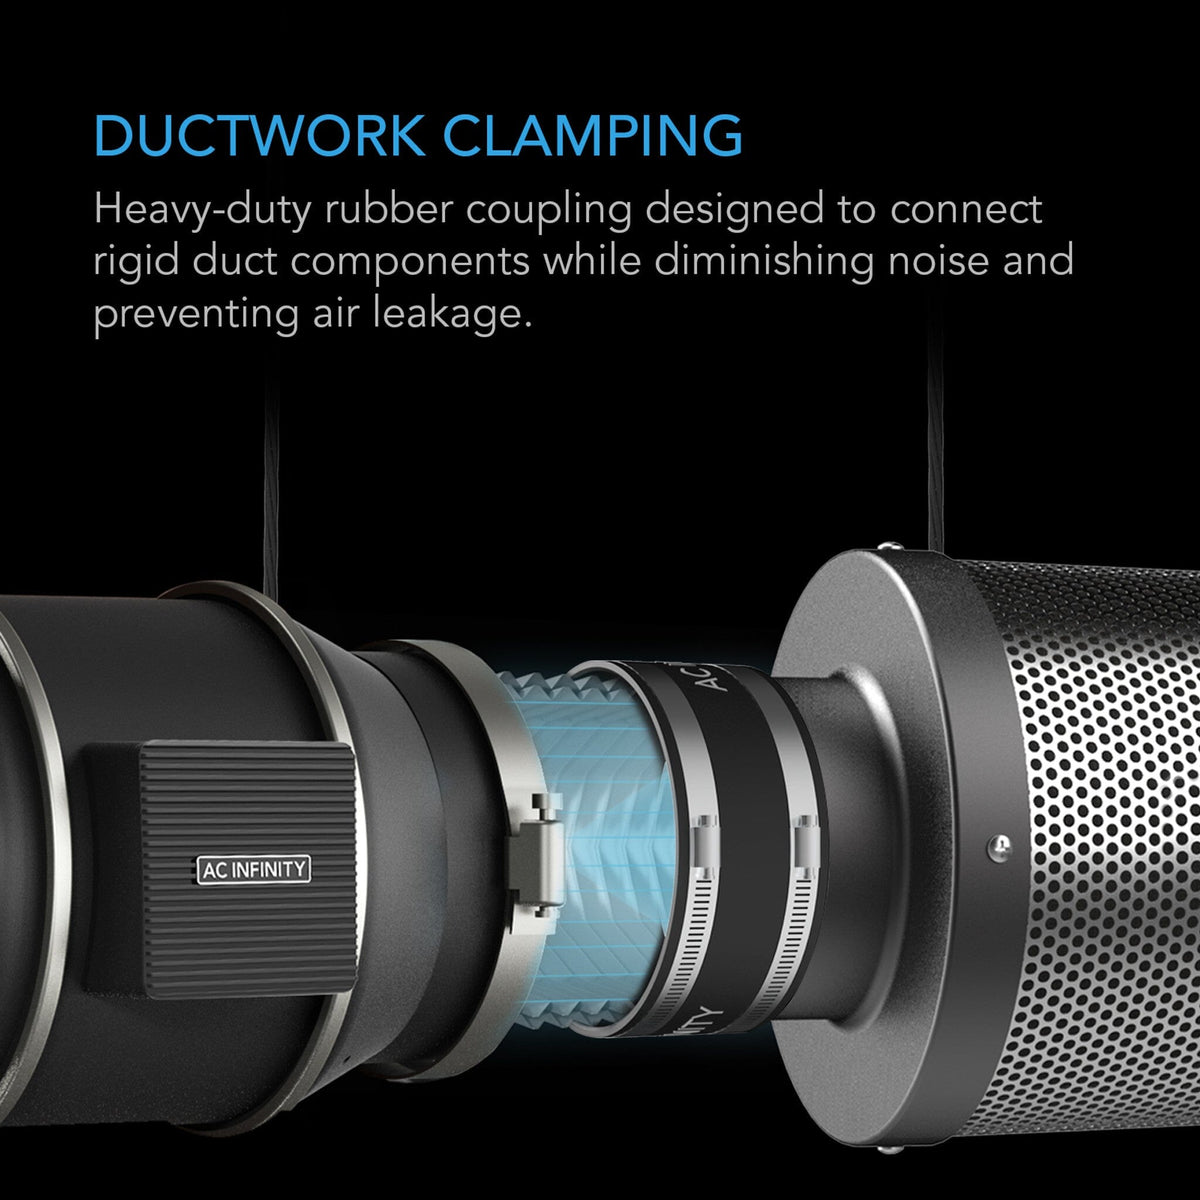 Ductwork clamping